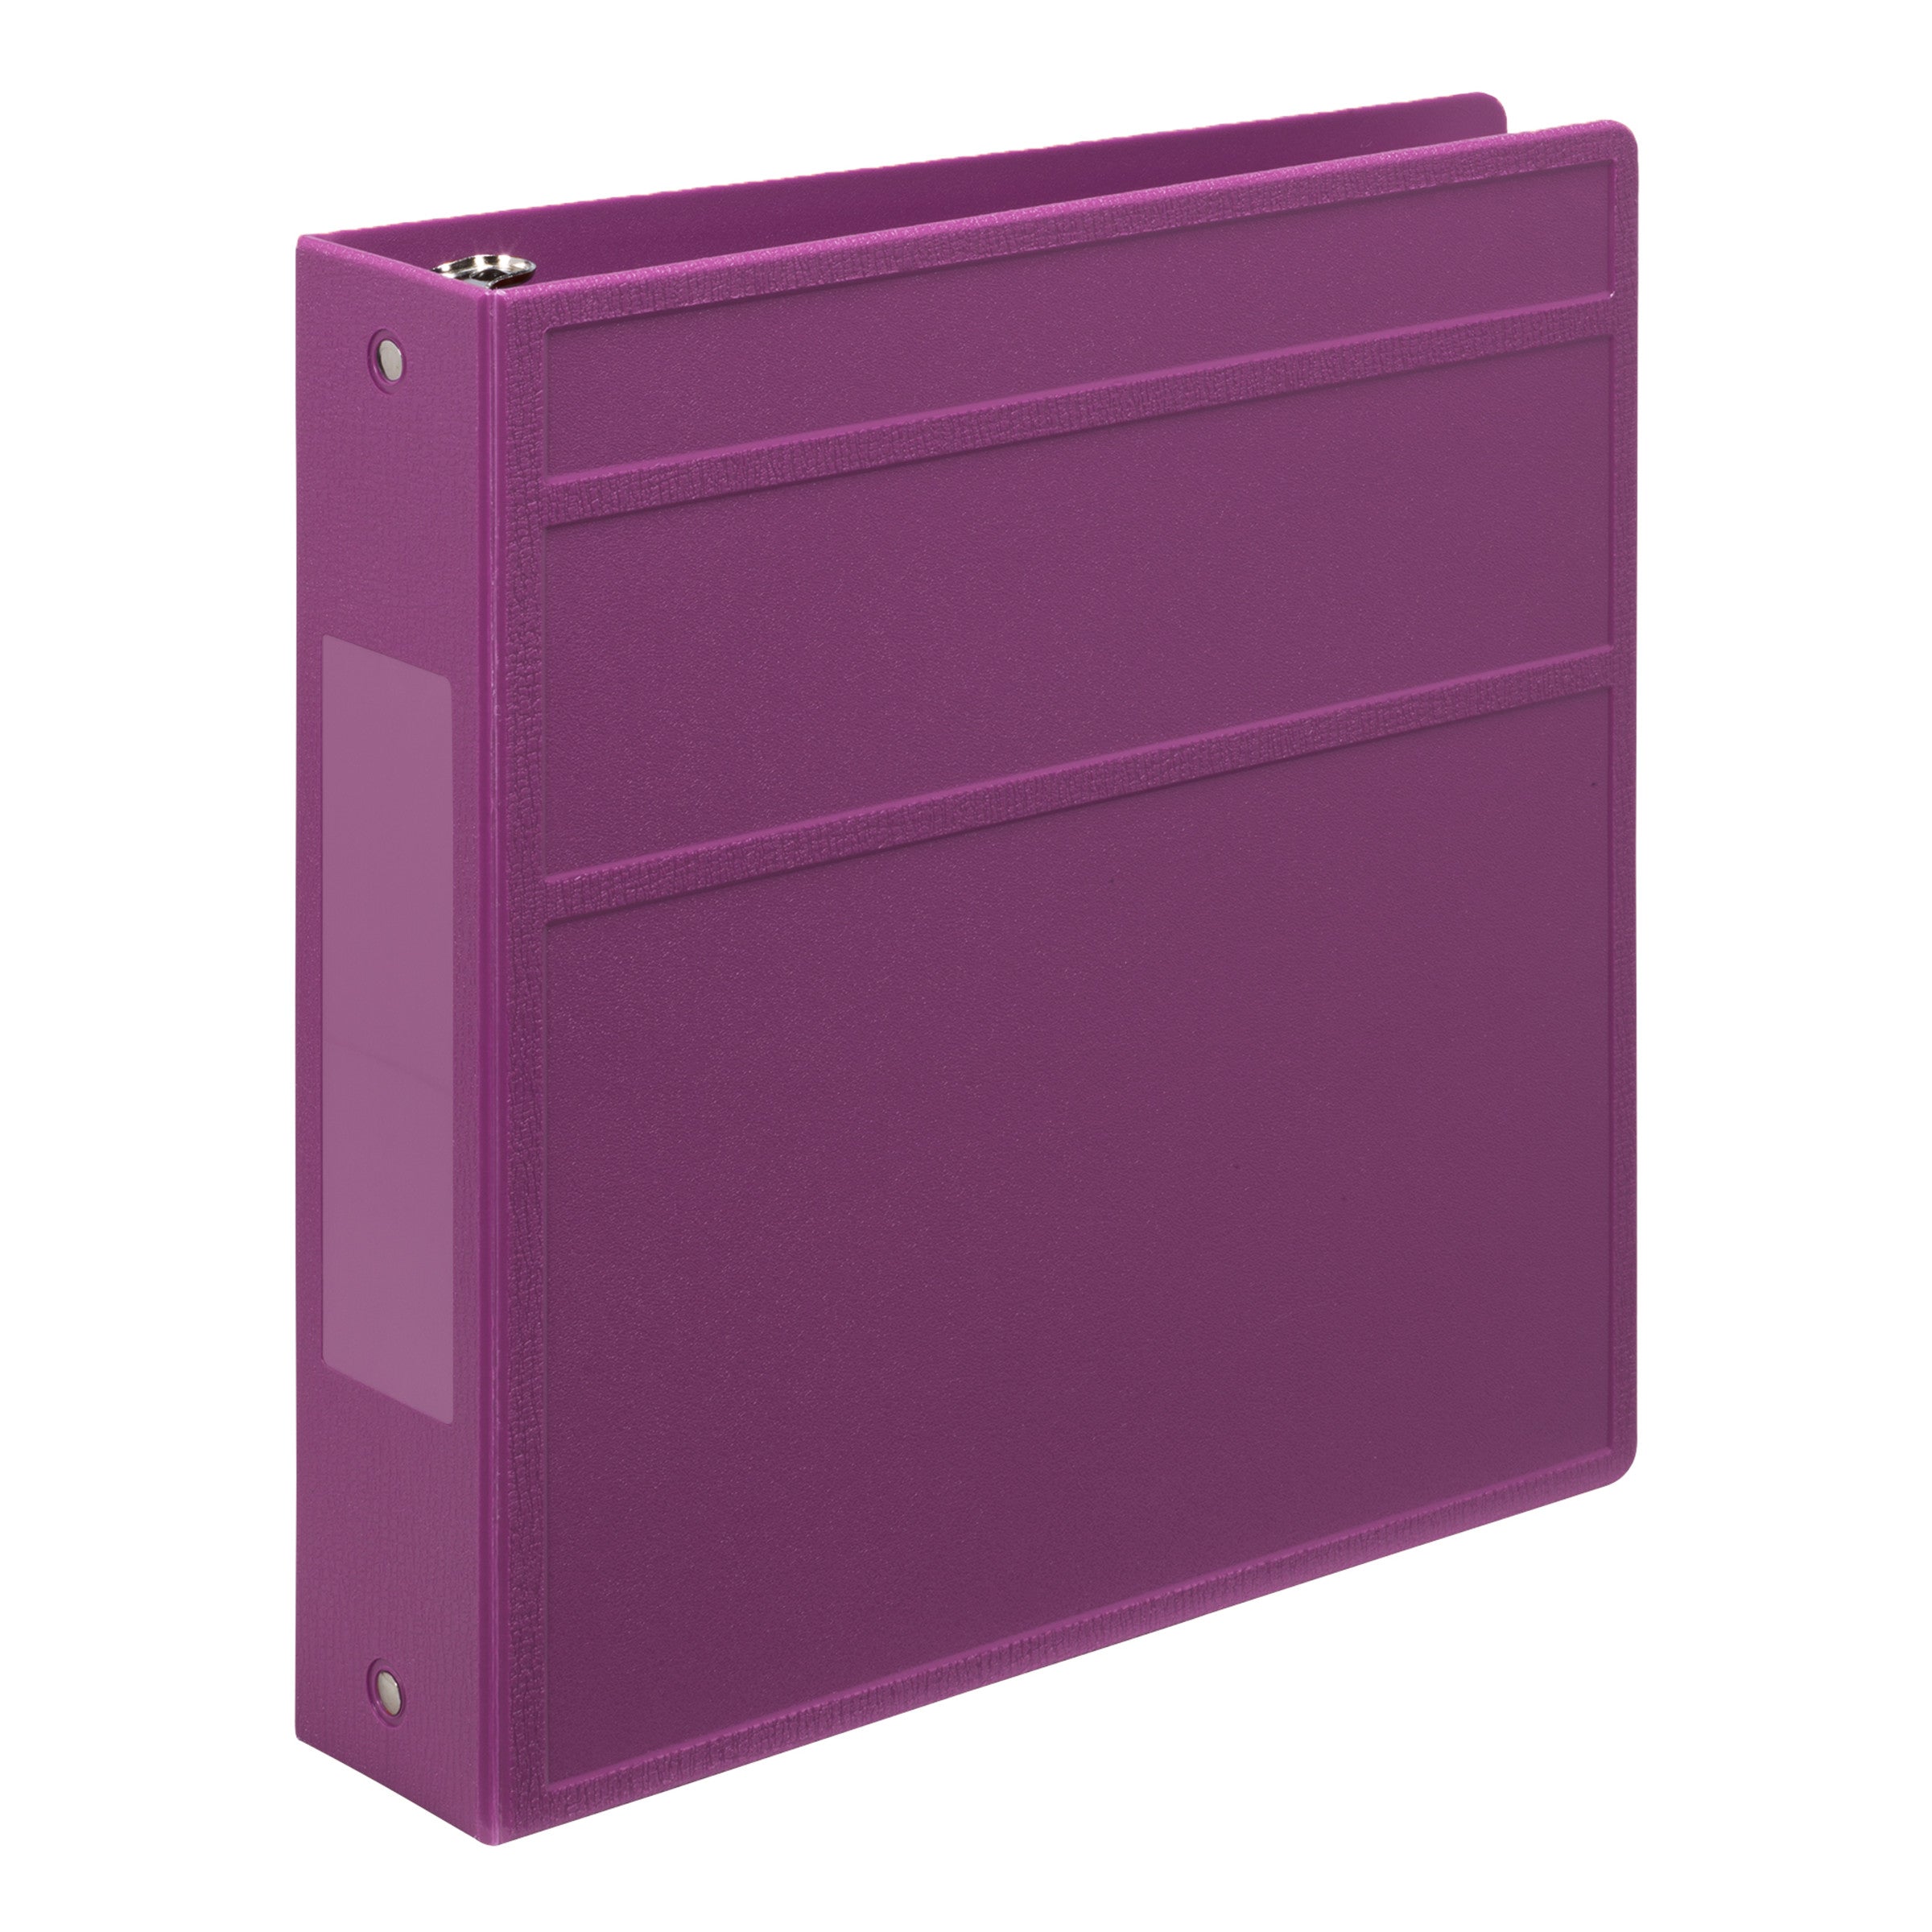 2-Inch Heavy Duty 2-Ring Binder for Medical Charting – Top Opening